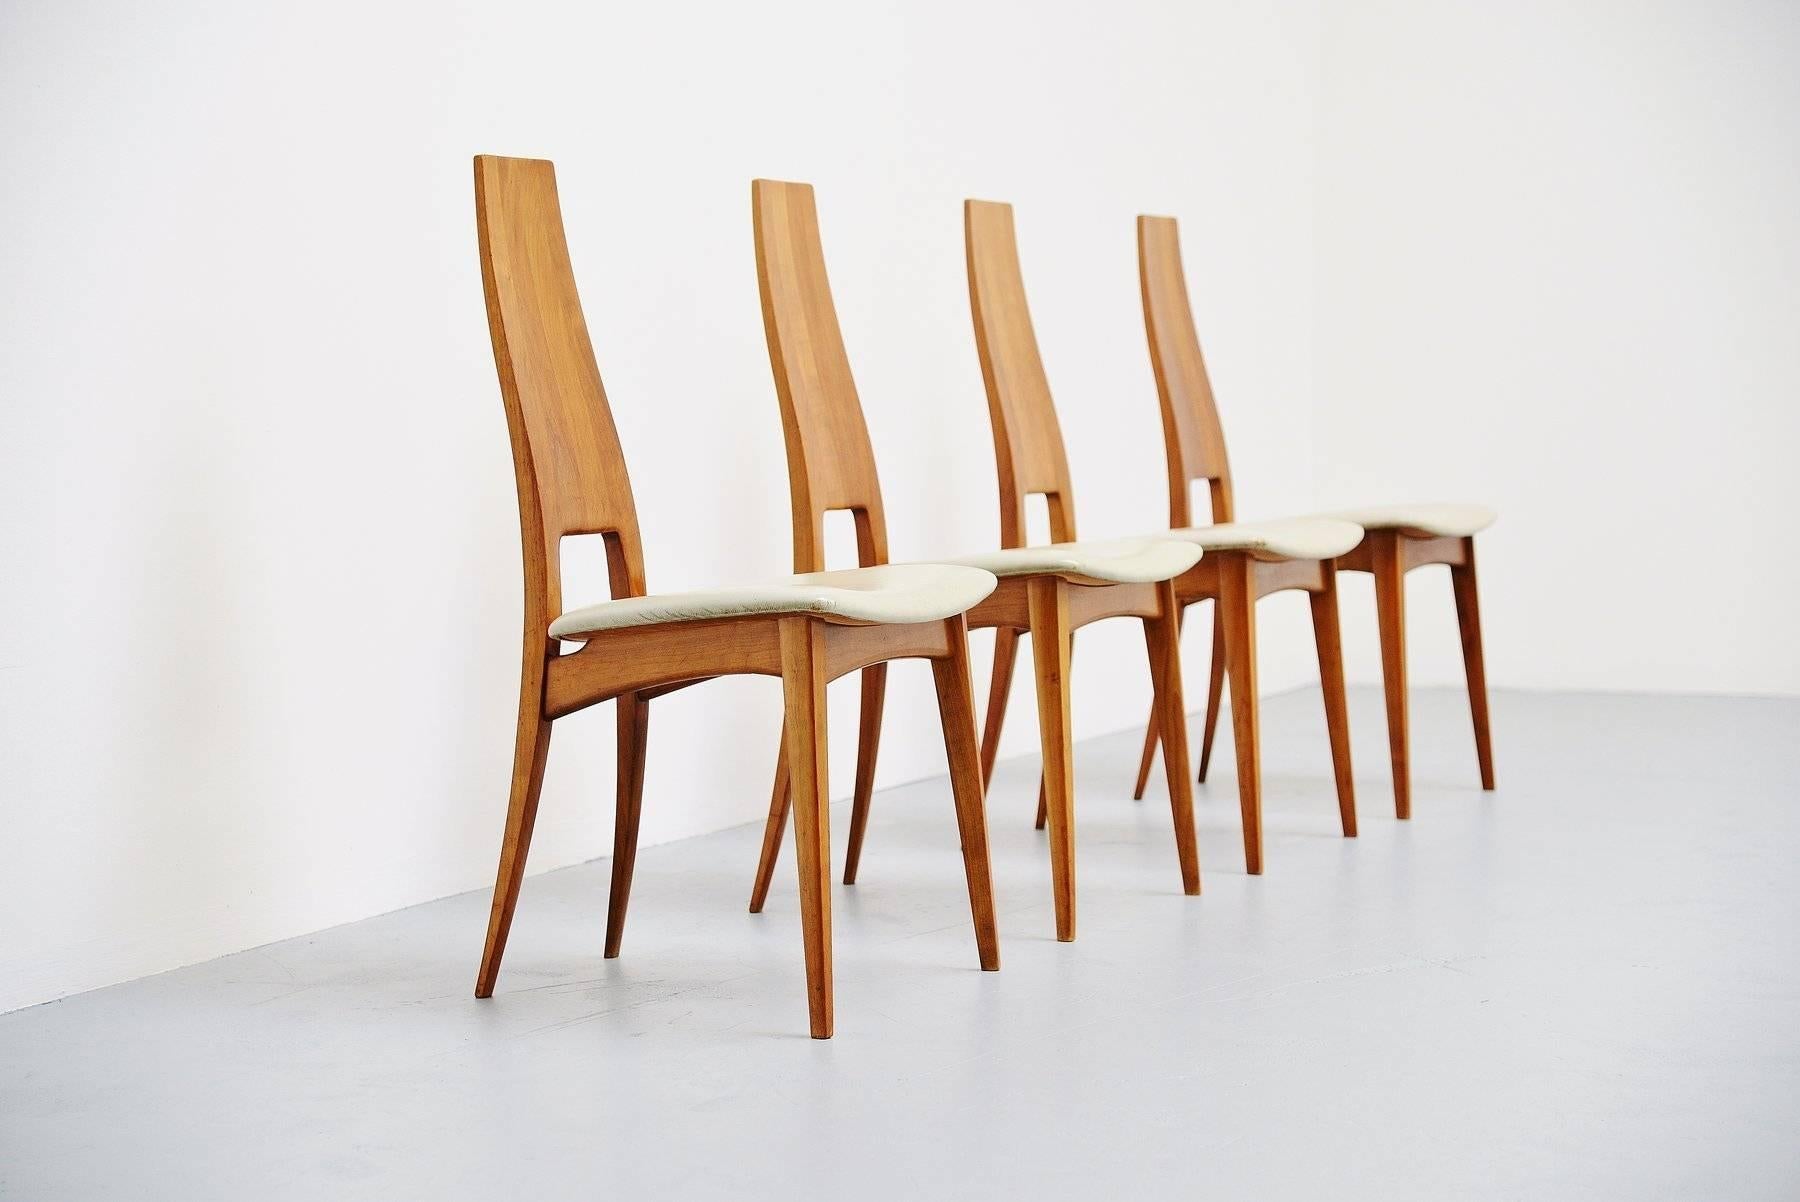 Very nice set of four slim dinner chairs in the manner of Carlo Mollino, Italy, 1950. Very nicely made and typical Italian shaped chairs in solid cherrywood and very light grey leather upholstery. Chairs are in original condition, wood has some